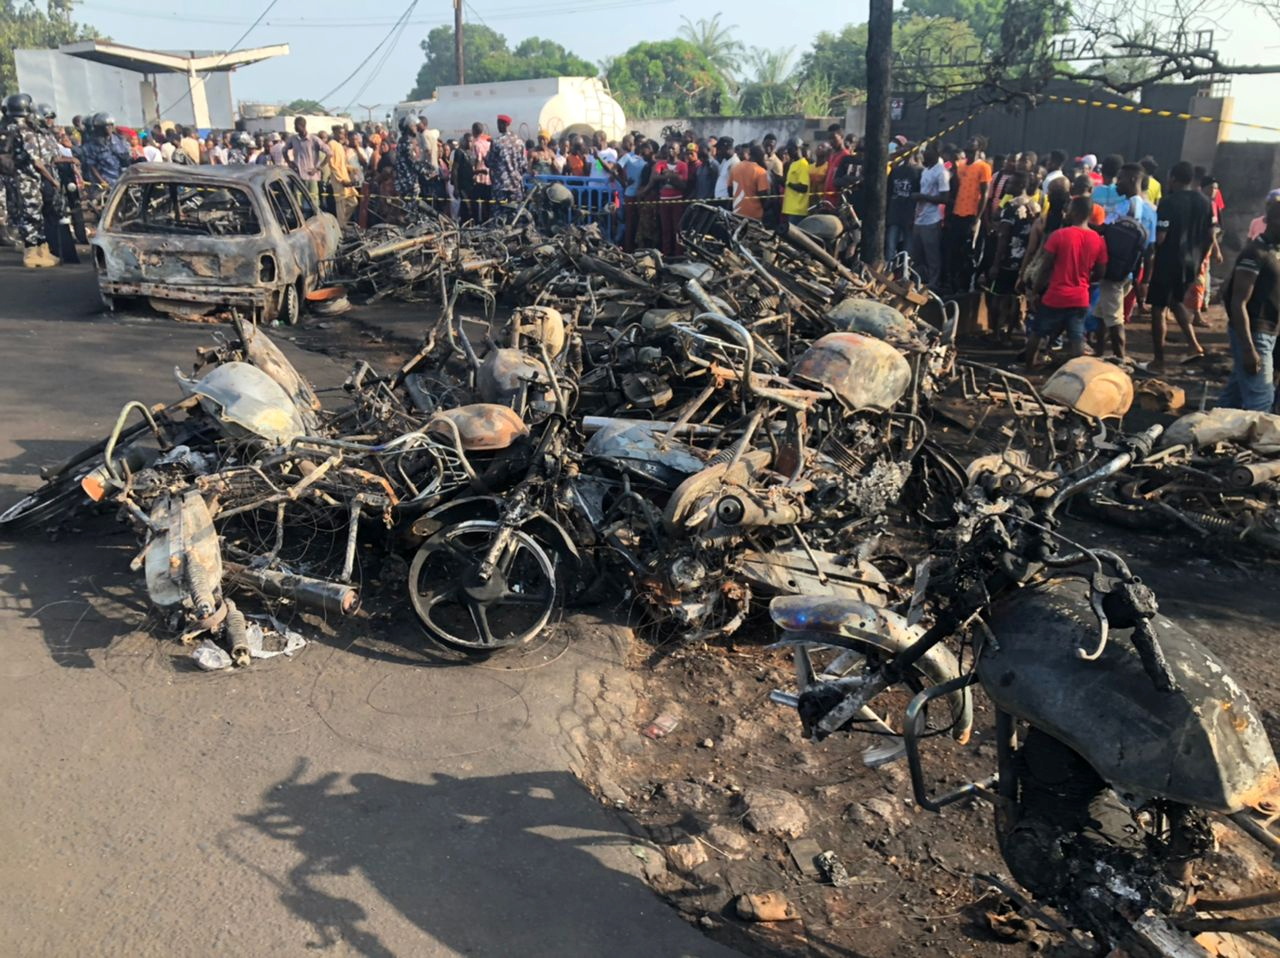 ople watch burnt car and motorcycles after a fuel tanker explosion in Freetown, Sierra Leone November 6, 2021. National Disaster Management Agency-Sierra Leone/Handout via REUTERS  